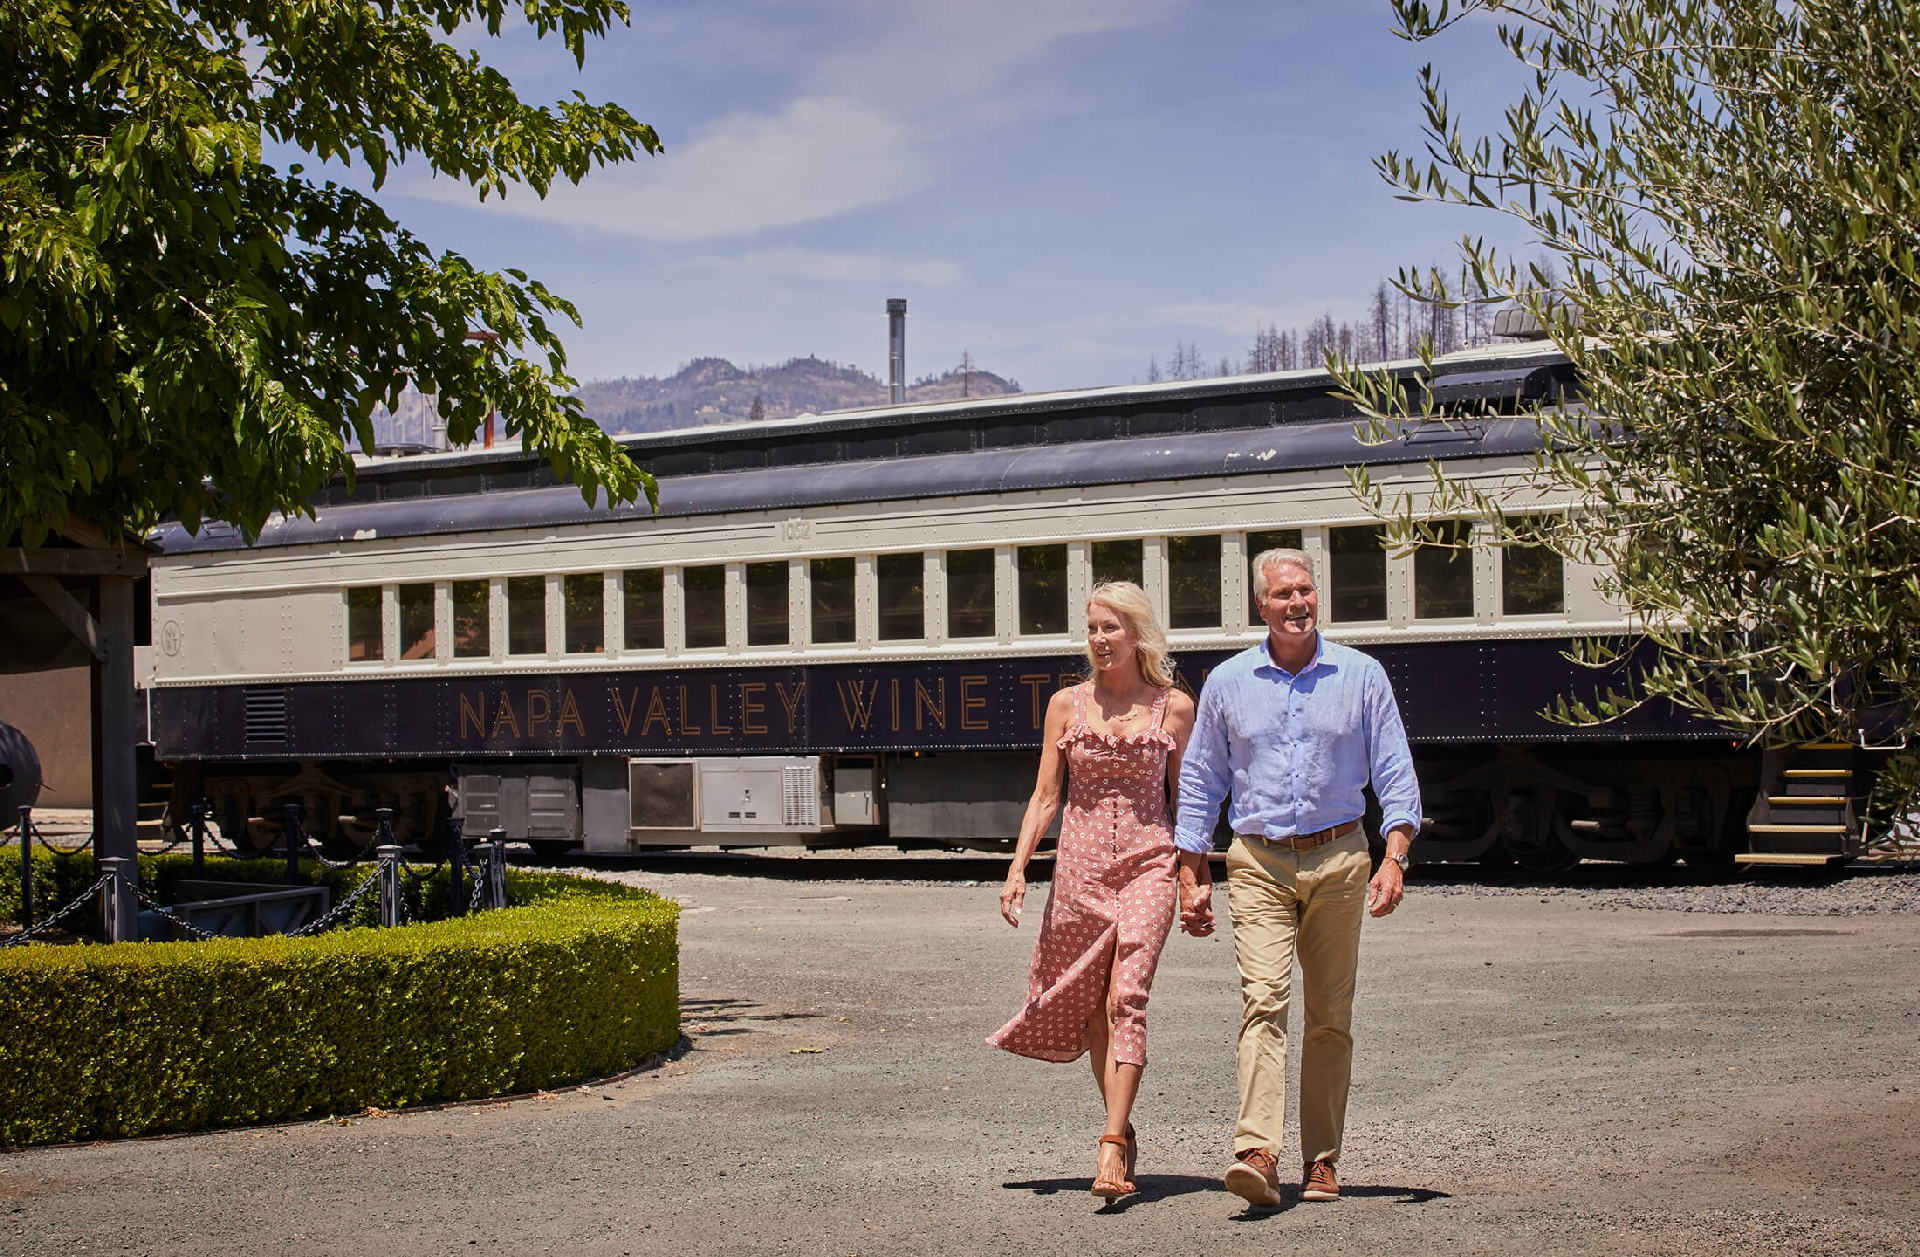 Scenic view of the Napa Valley Wine Train traveling through lush vineyards, capturing the essence of the Napa Valley Wine experience